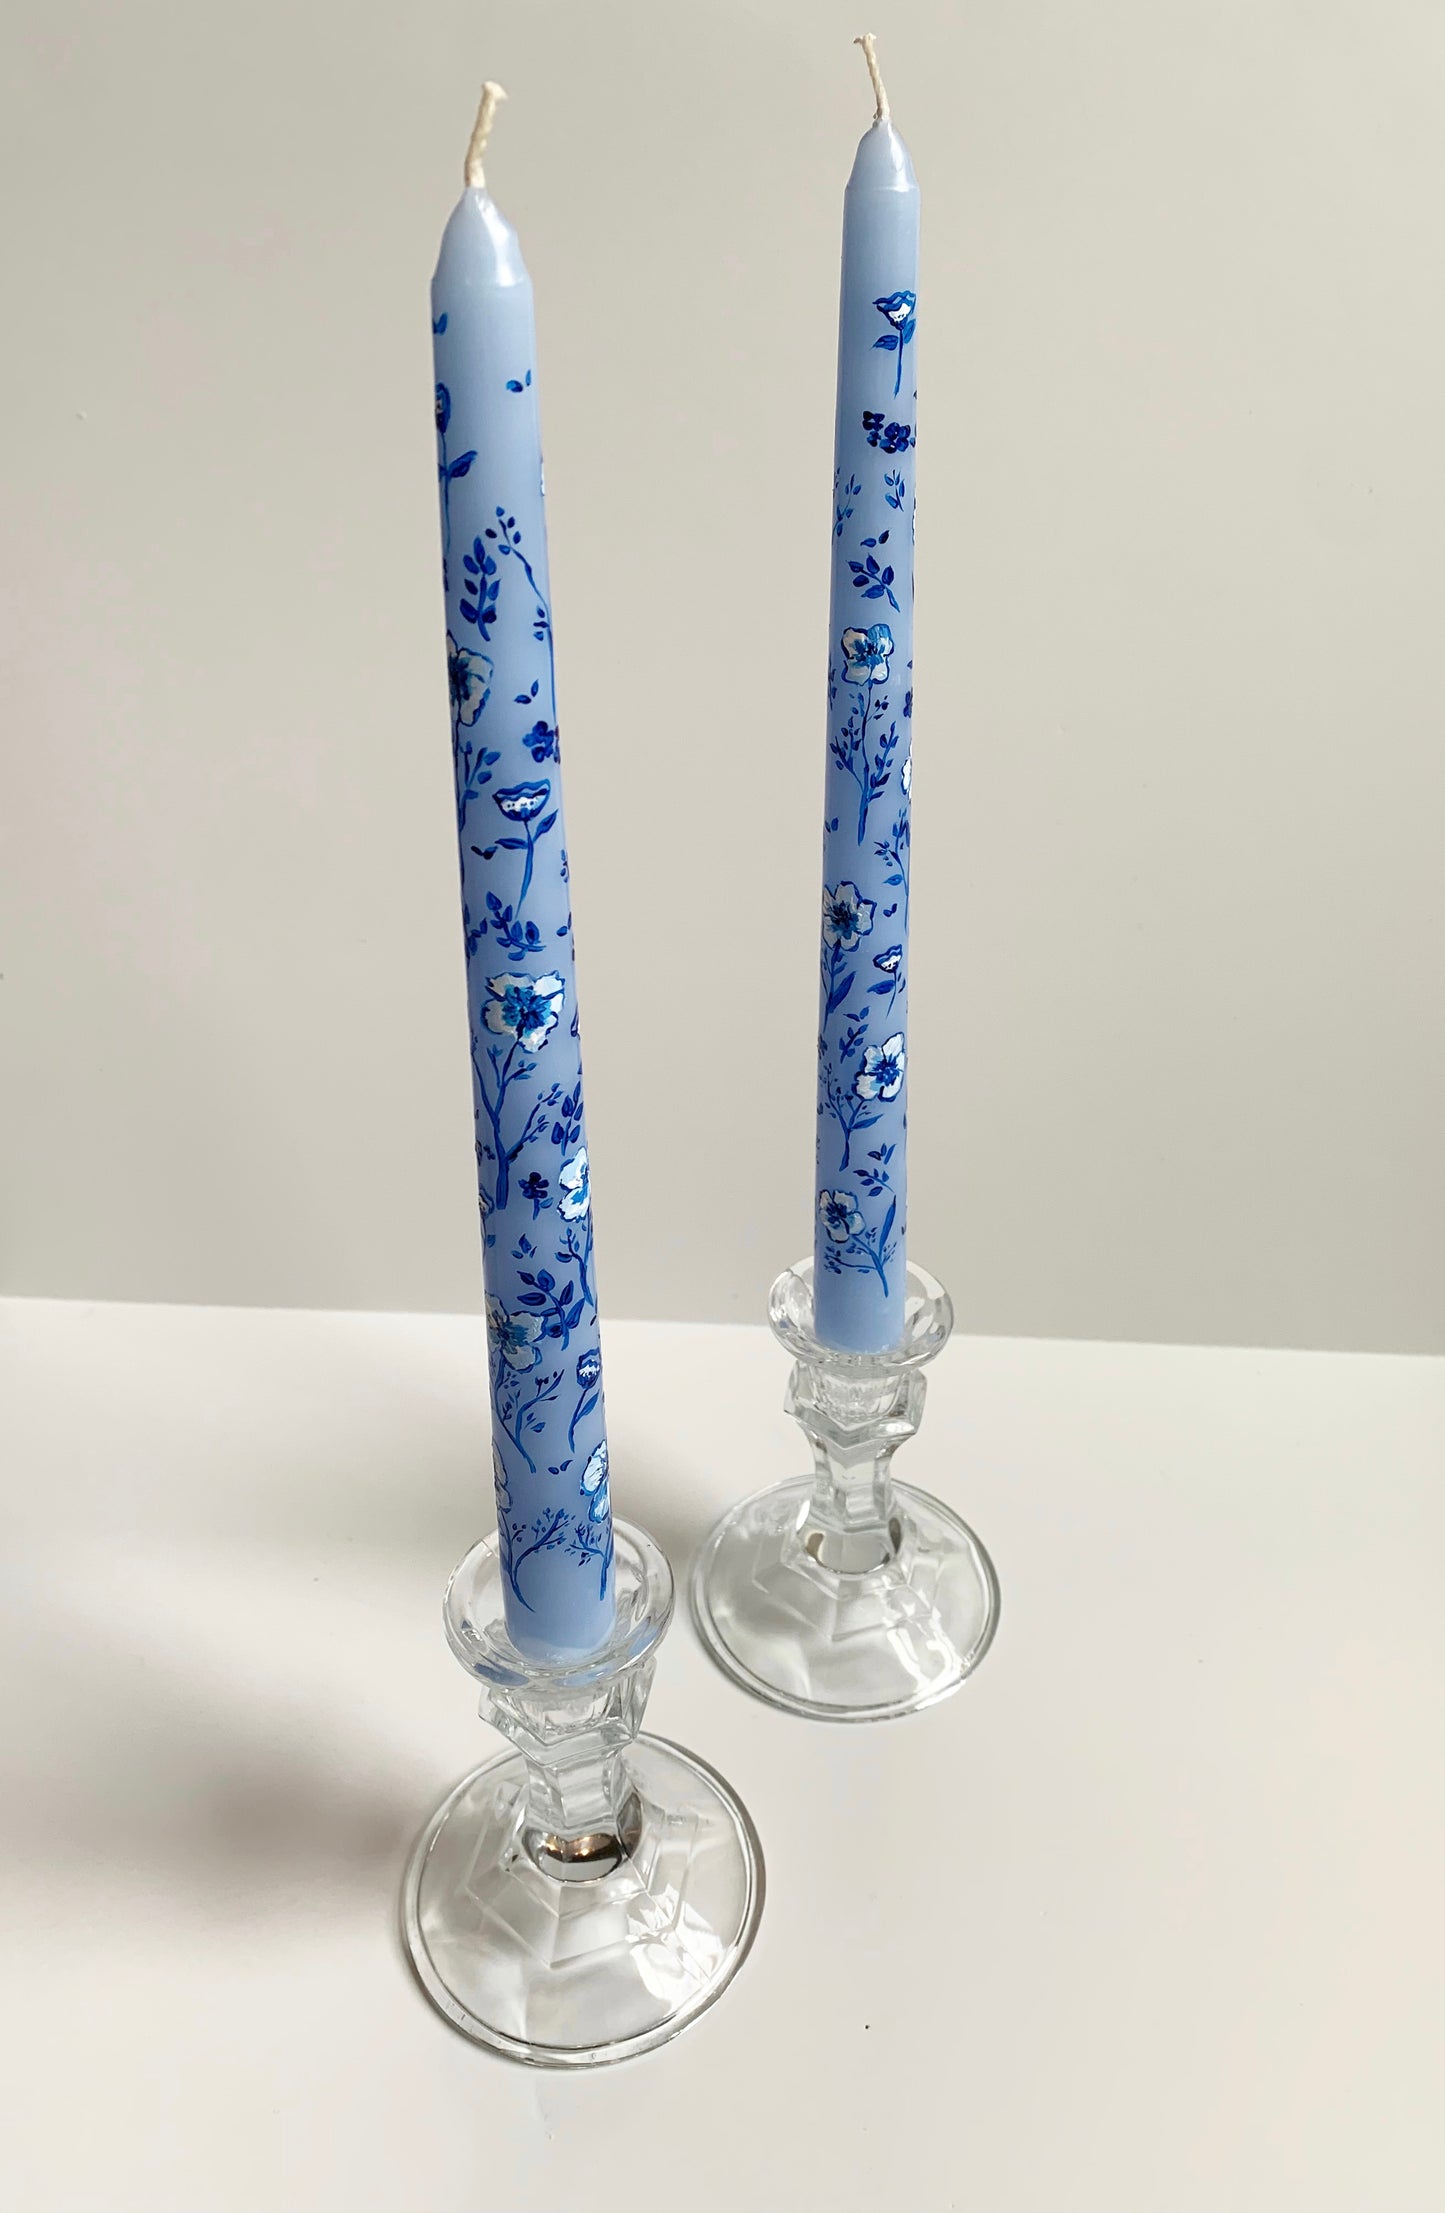 tonal blue floral hand-painted candlesticks